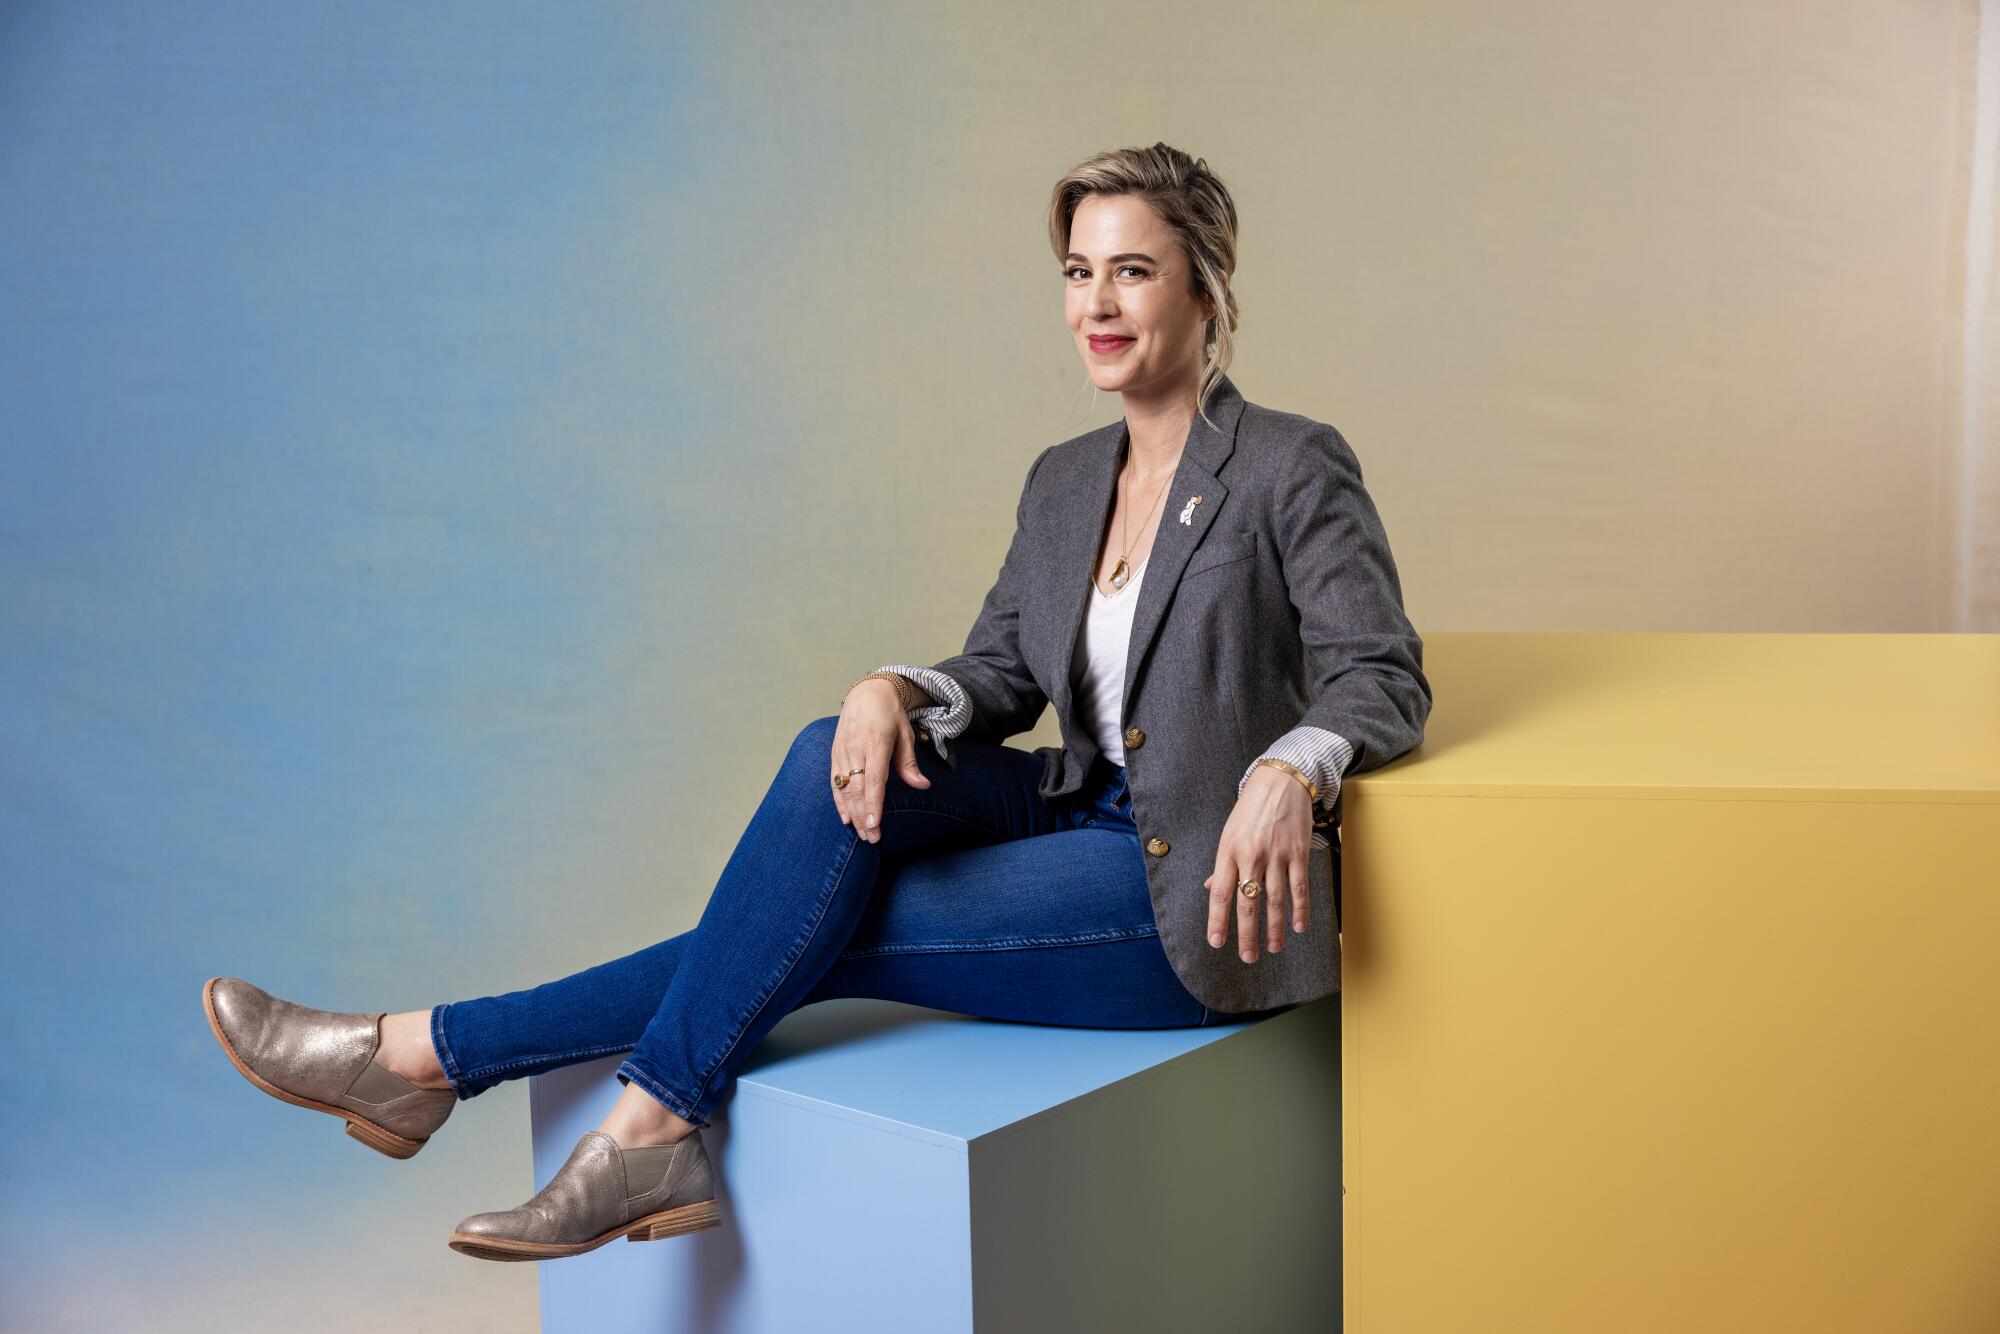 Christy Hall wears a blouse, jacket and jeans while sitting on one cube and resting an arm on another.